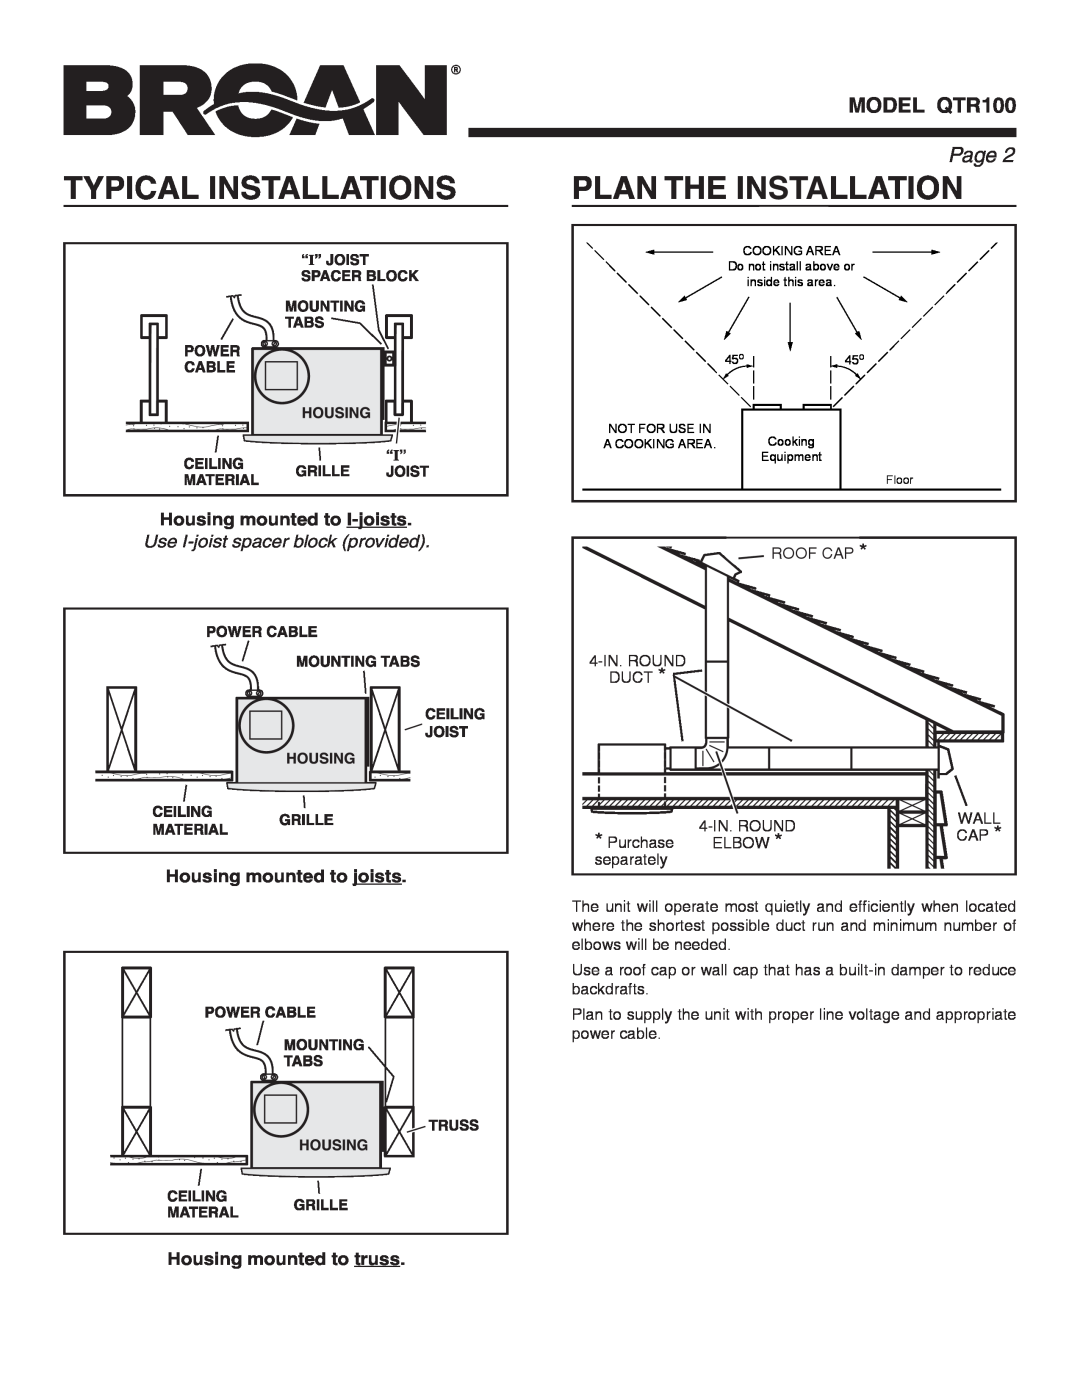 Broan QTR100 Typical Installations, Plan The Installation, Page , Housing mounted to I-joists, Housing mounted to joists 